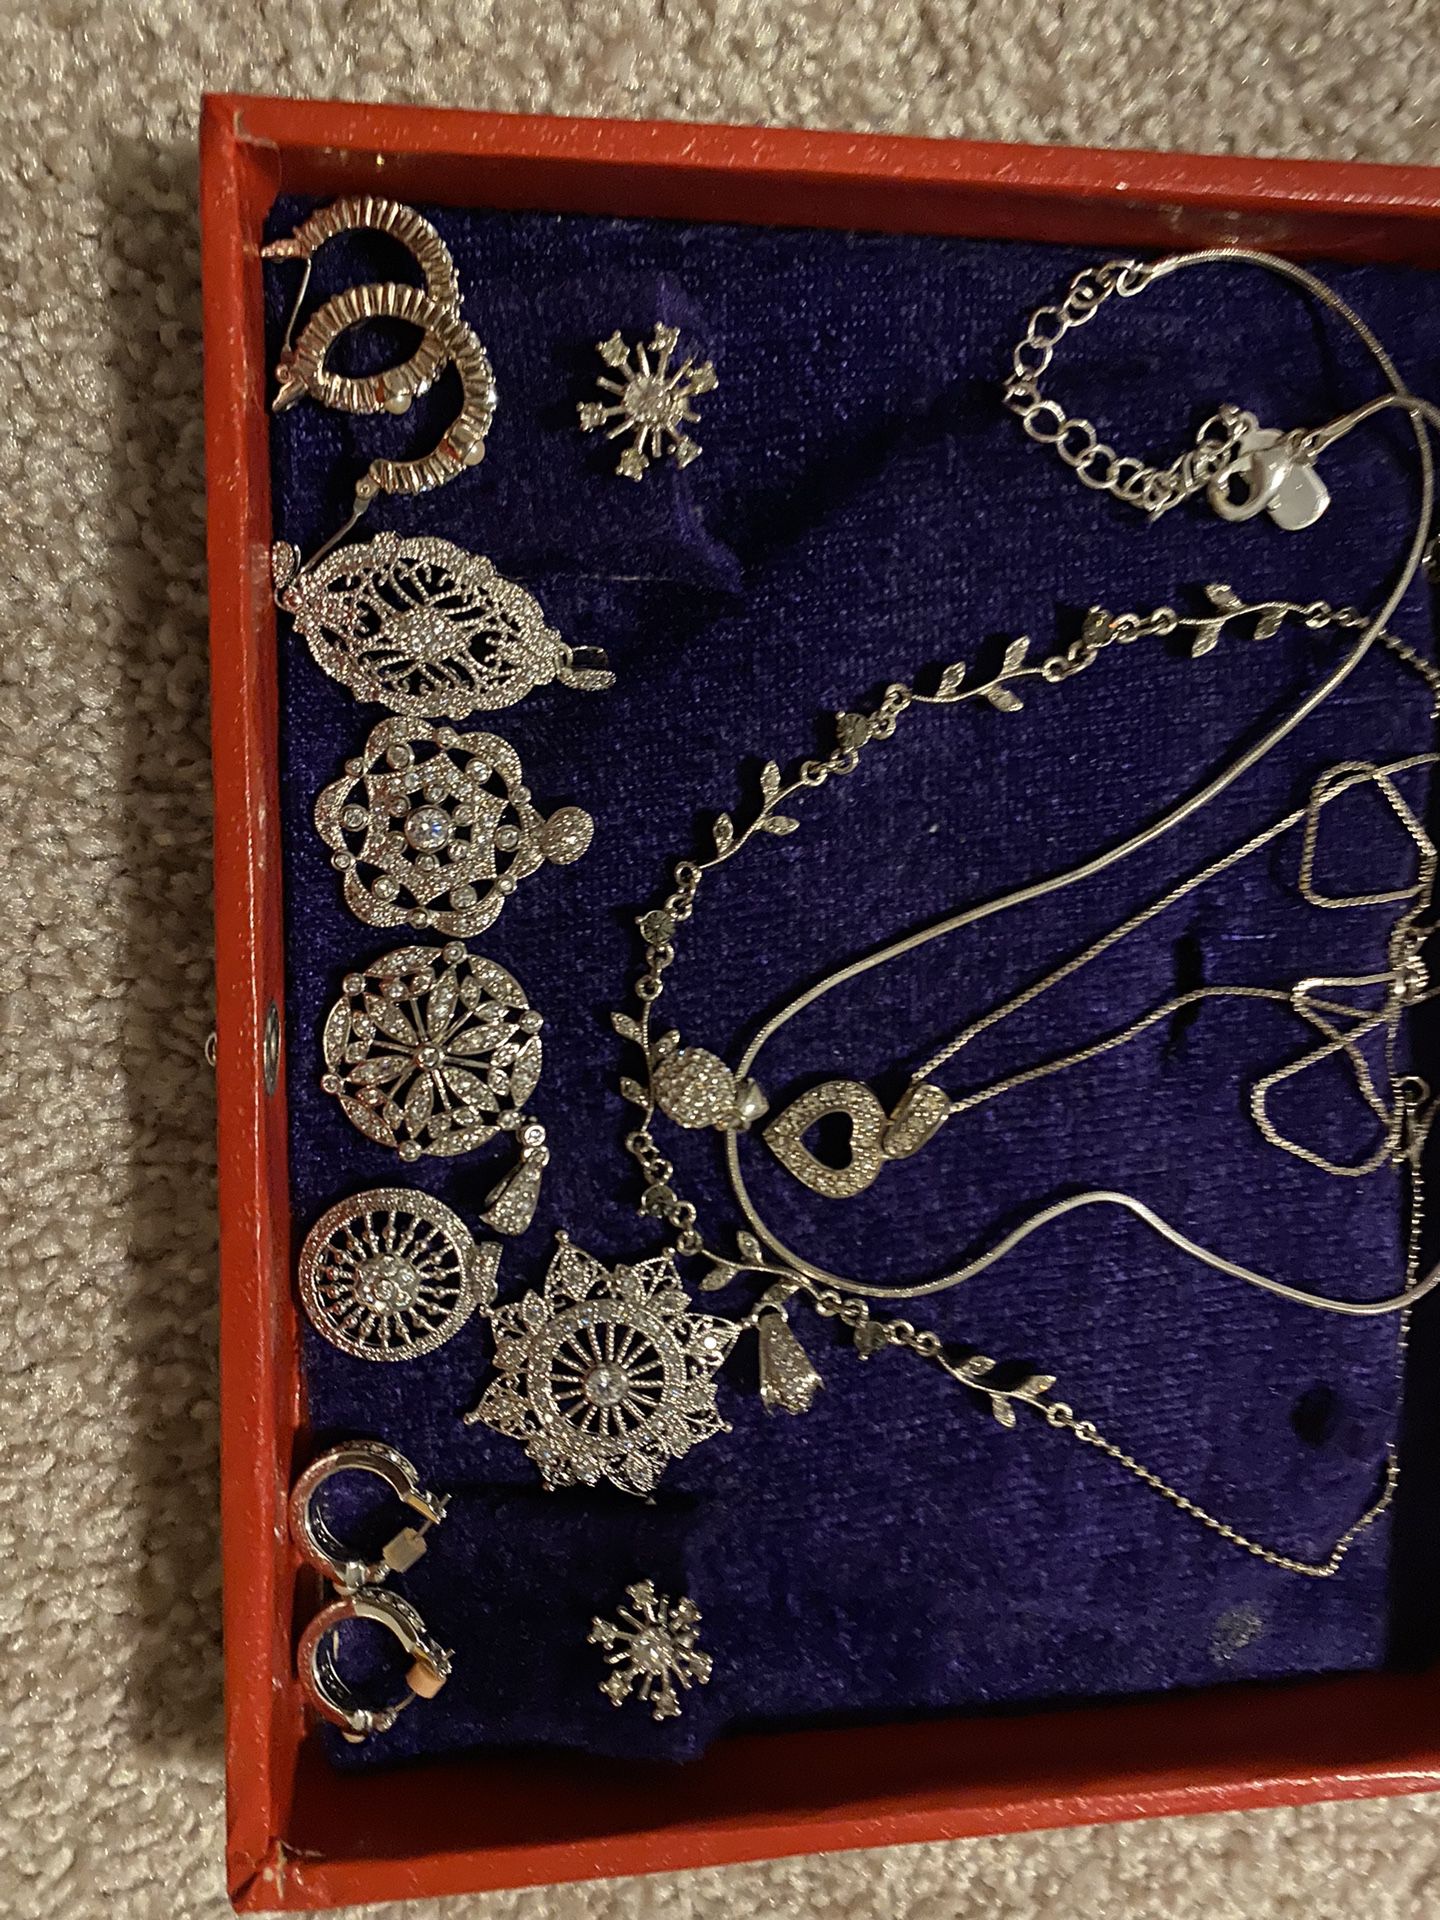 New Jewelry, Some Are Vintage From Avon, Some 925 Sterling Silver 